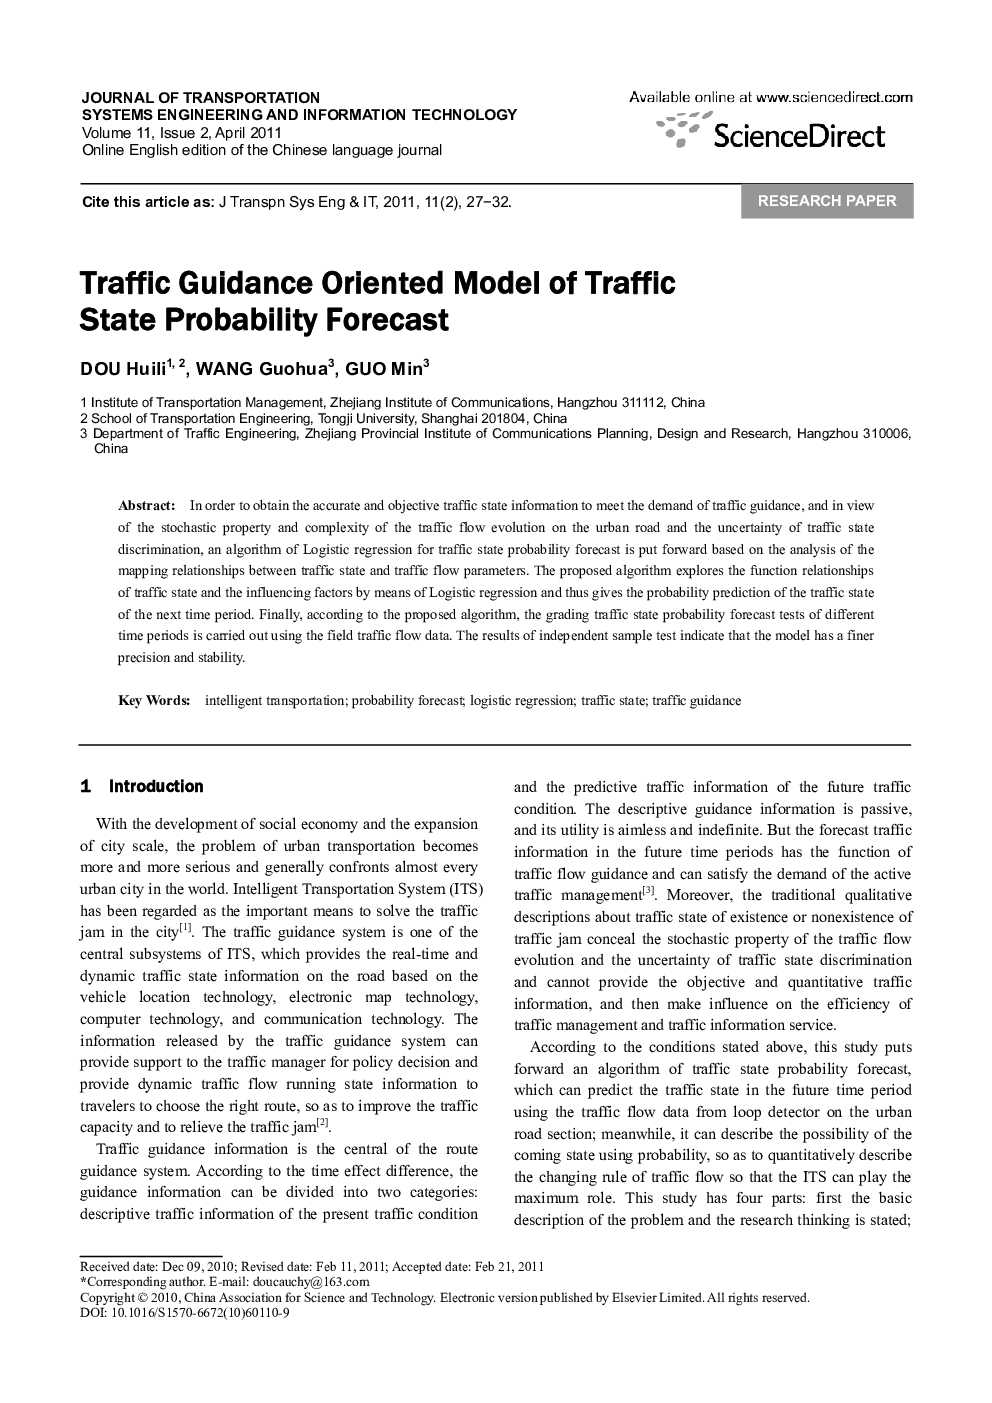 Traffic Guidance Oriented Model of Traffic State Probability Forecast